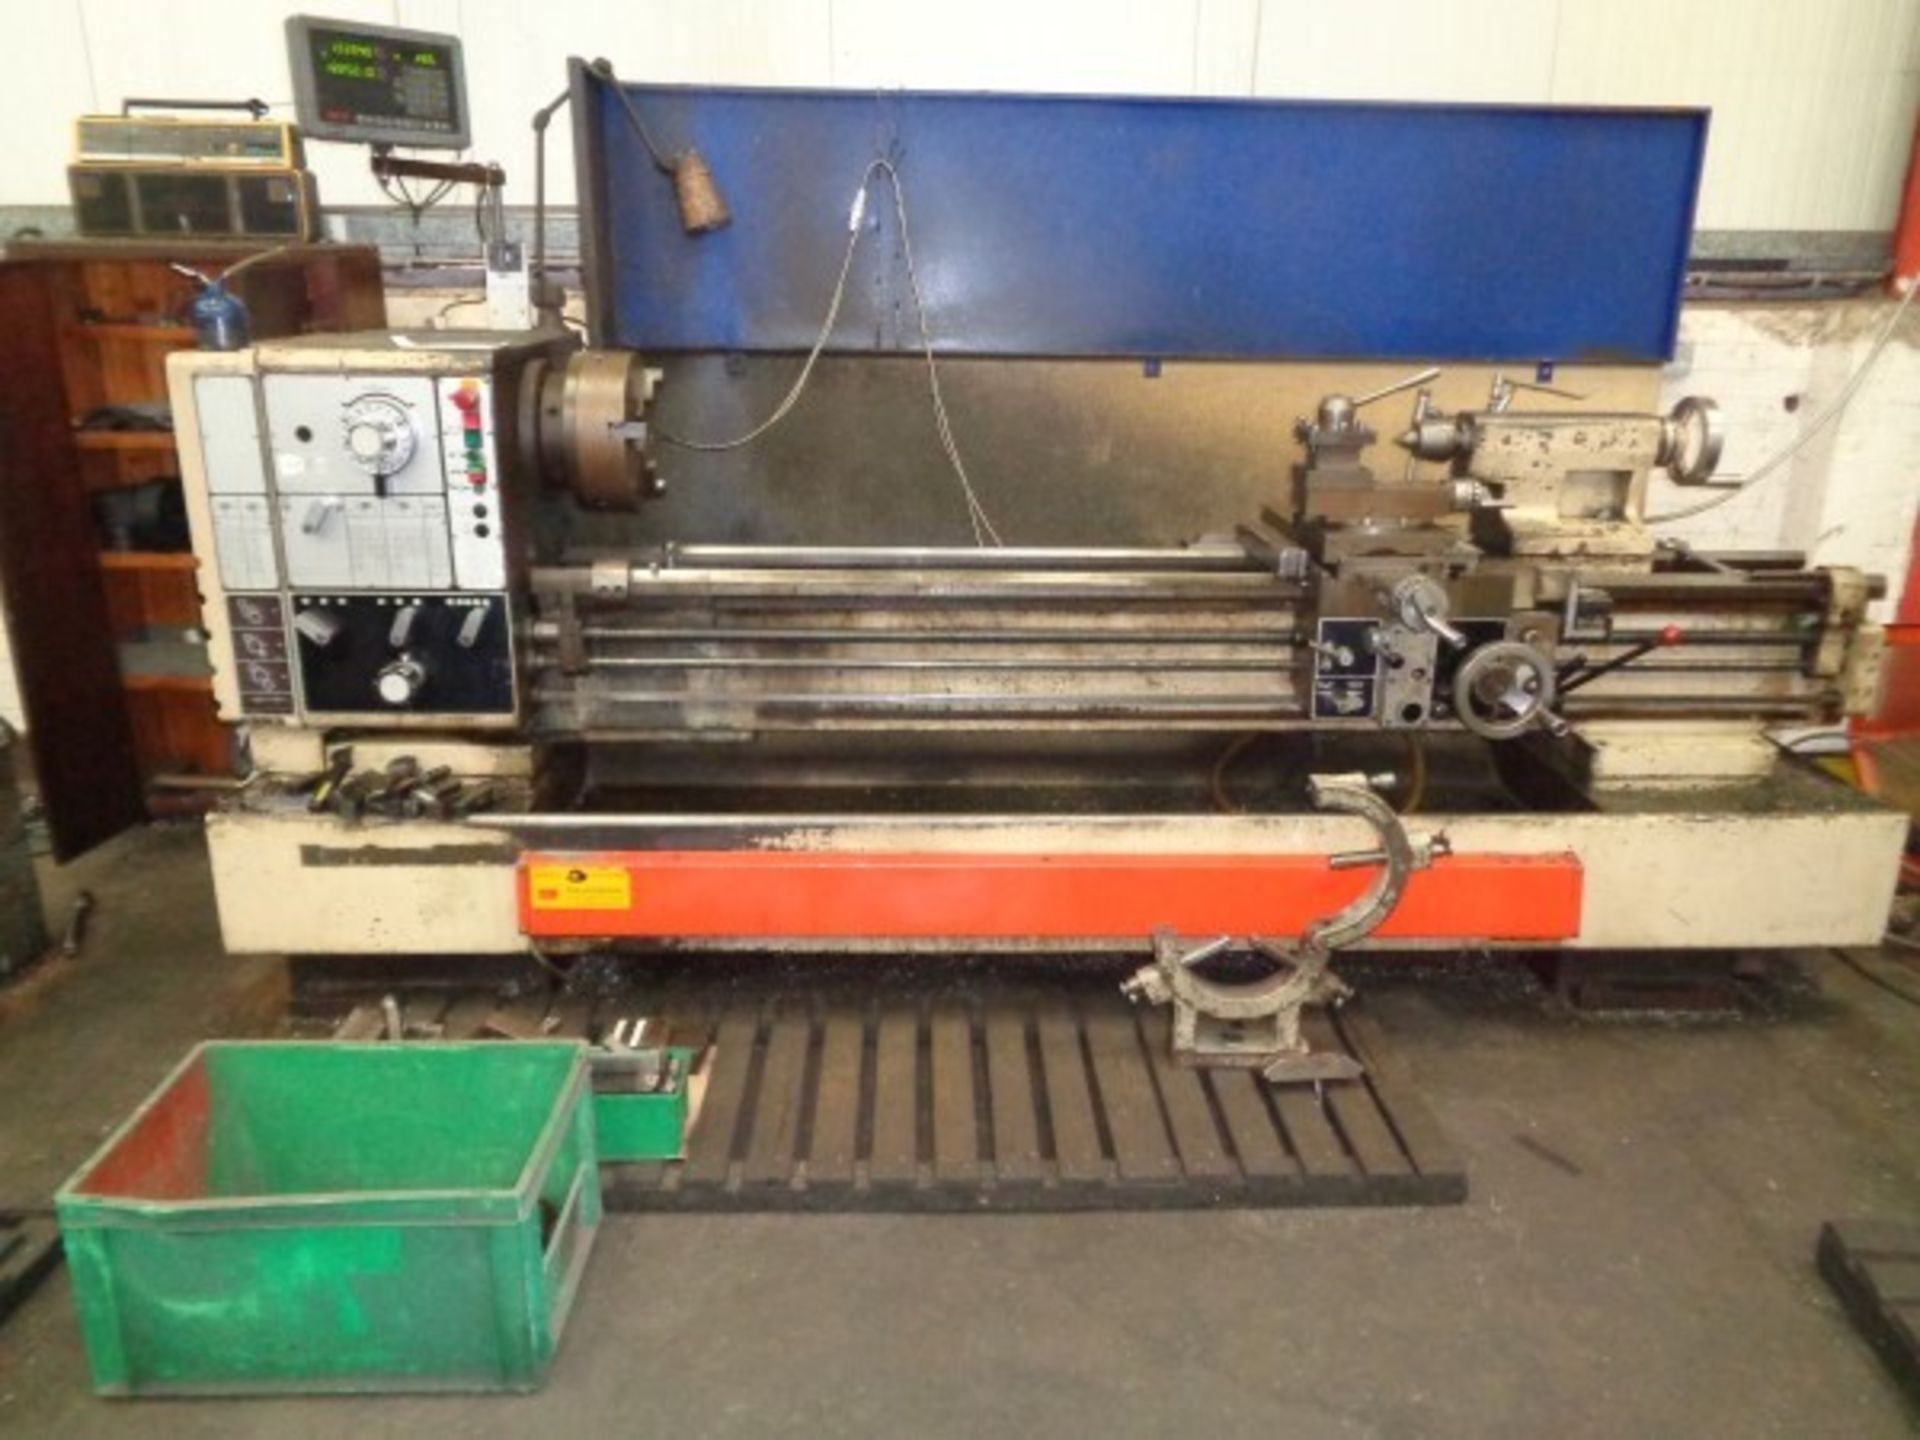 Harrison M500 GAP bed centre lathe with GR Dro, Serial no. 500737